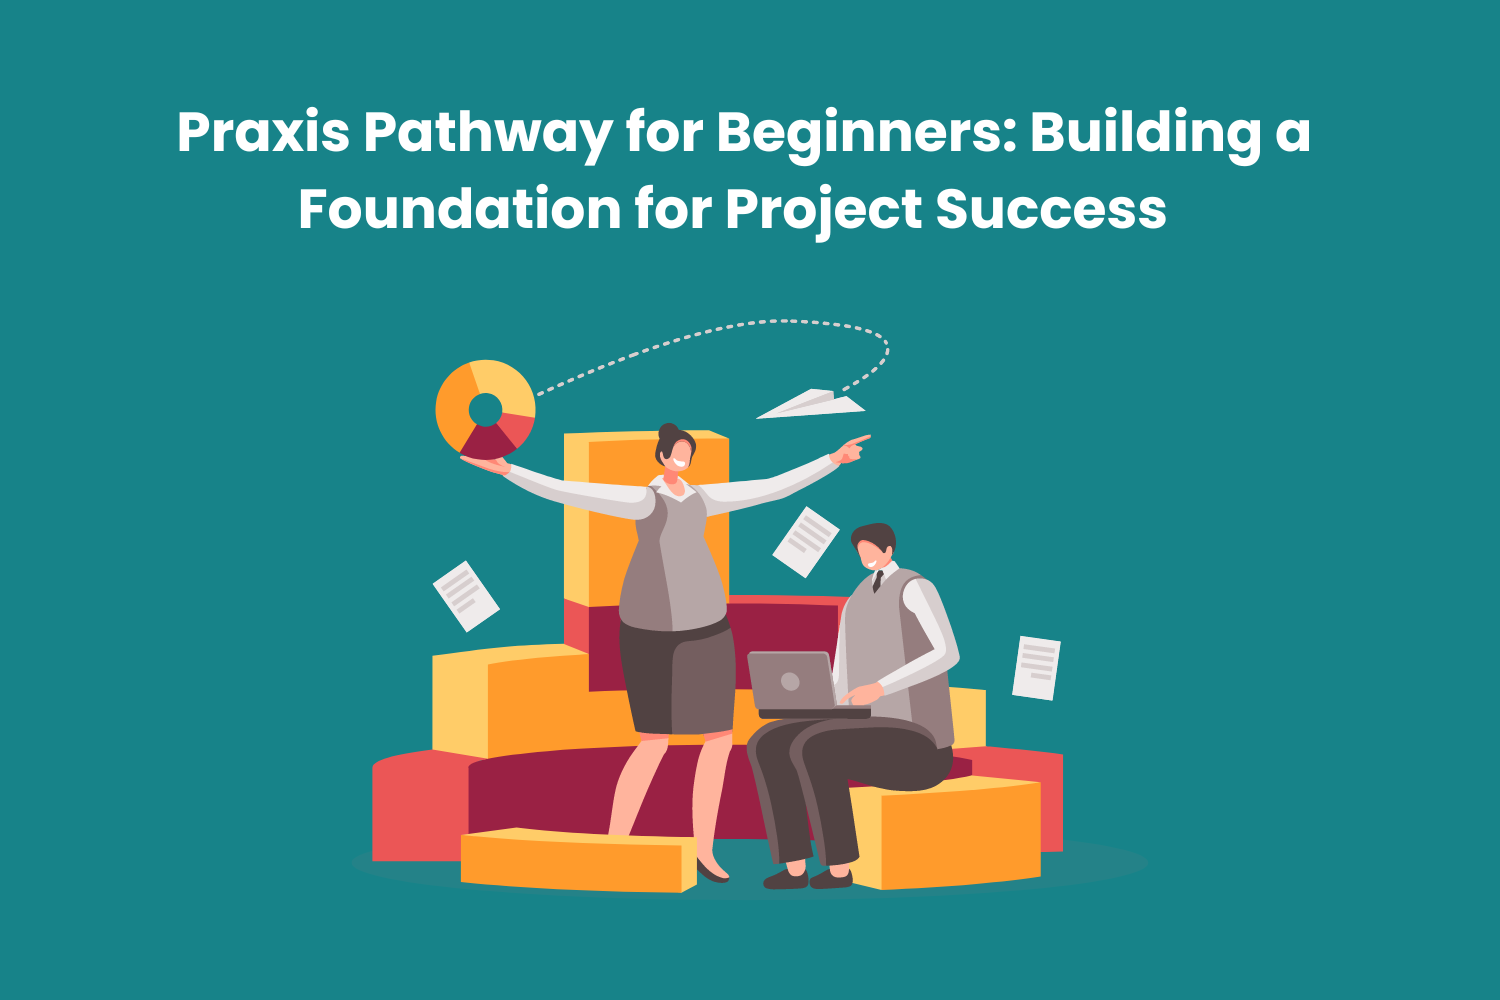 Praxis Pathway for Beginners